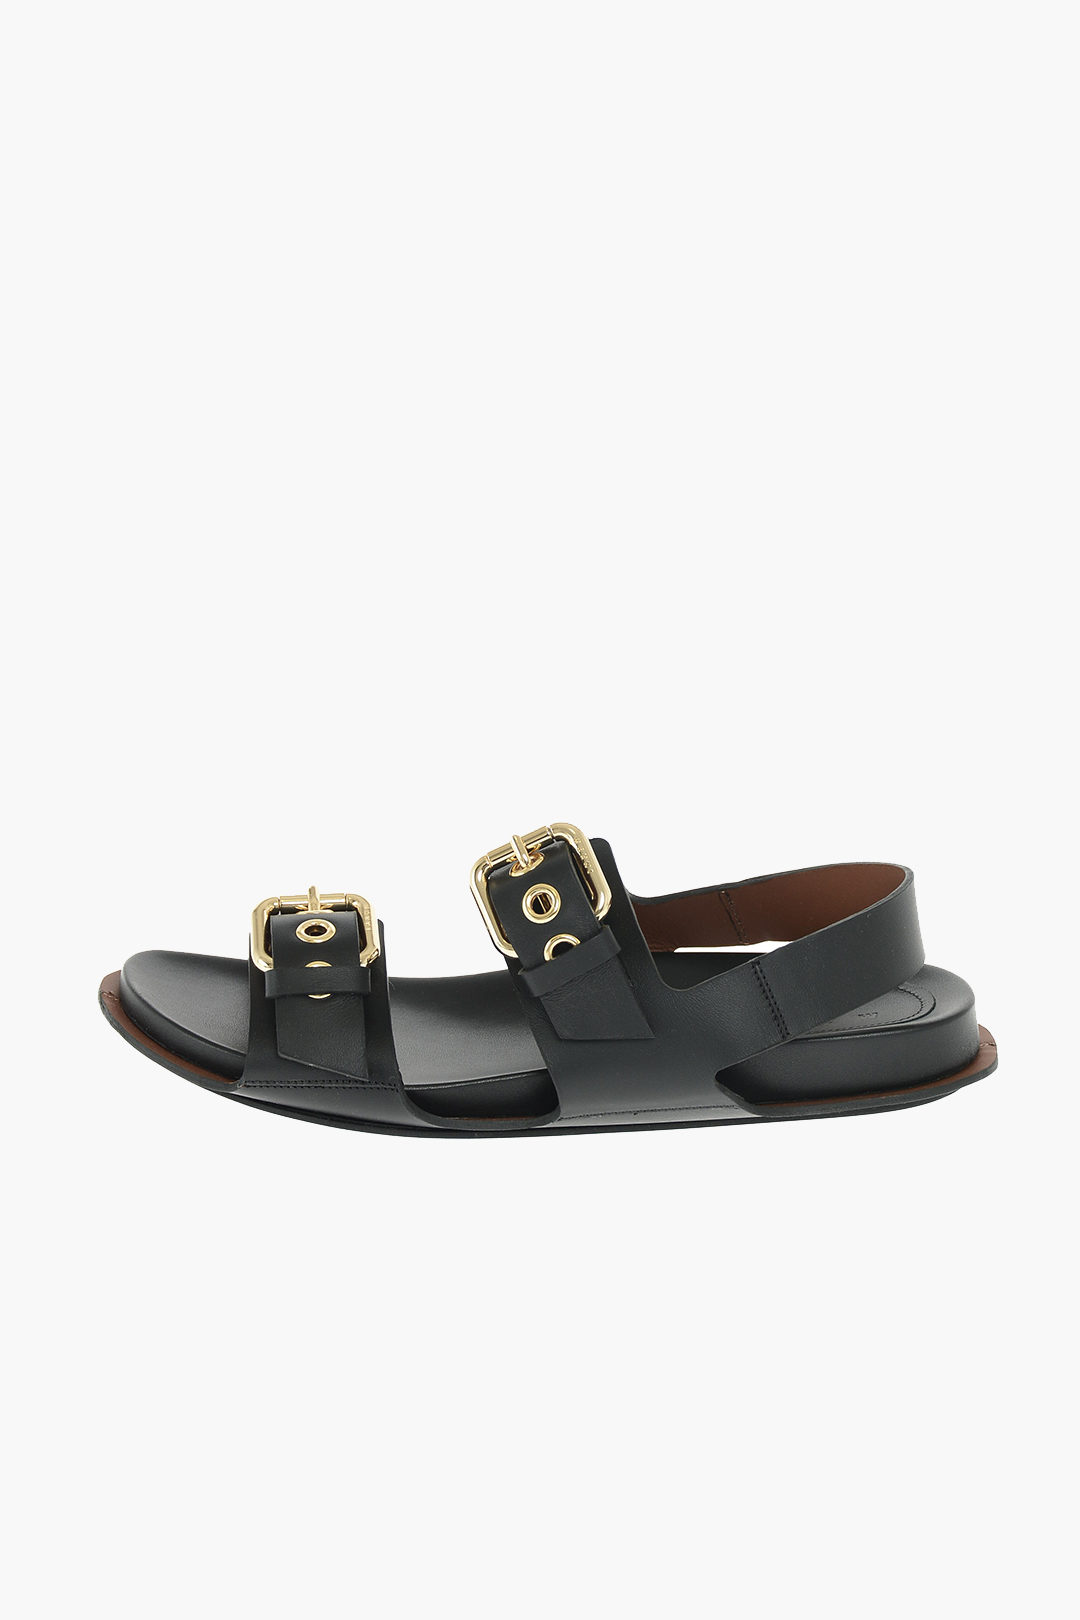 Marni Leather Flat Sandals with Buckles women - Glamood Outlet